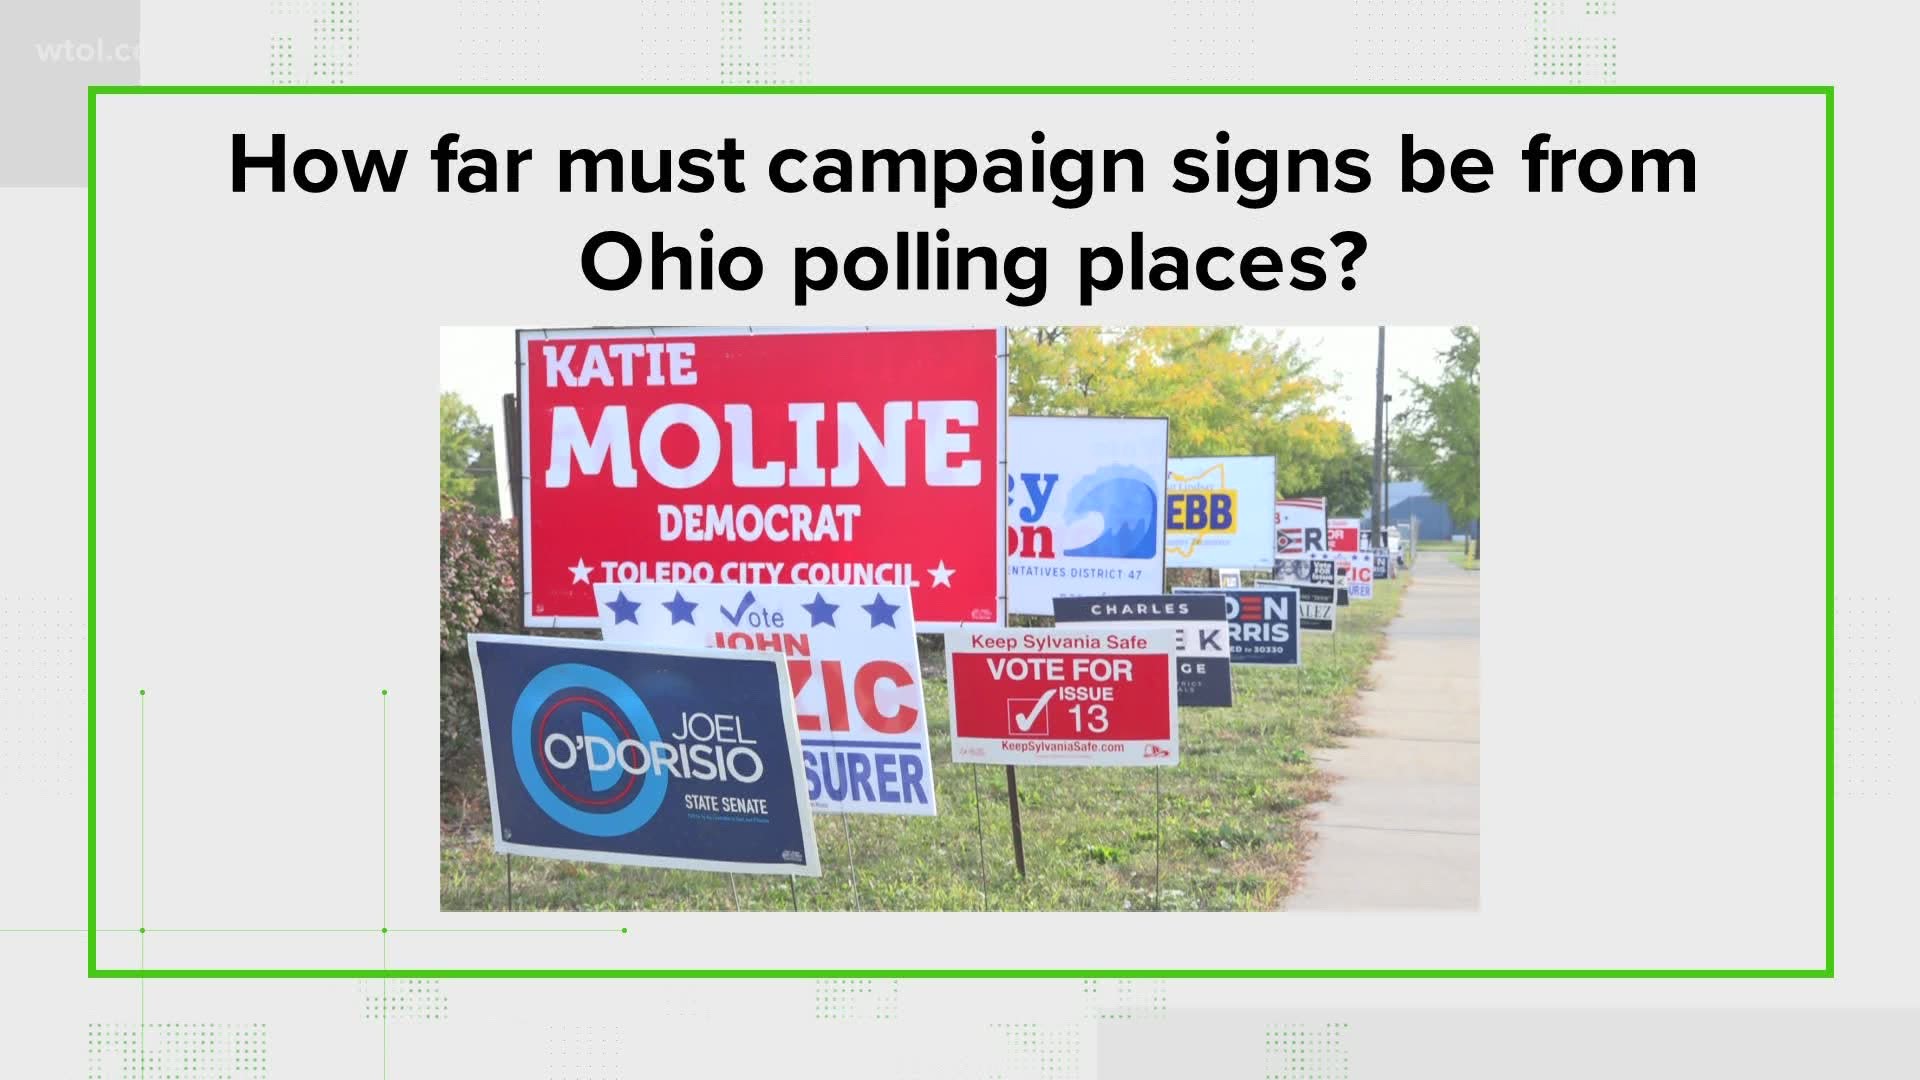 Campaign signs are a common sight leading up to Election Day. But in Ohio, there are restrictions on where they can be placed.